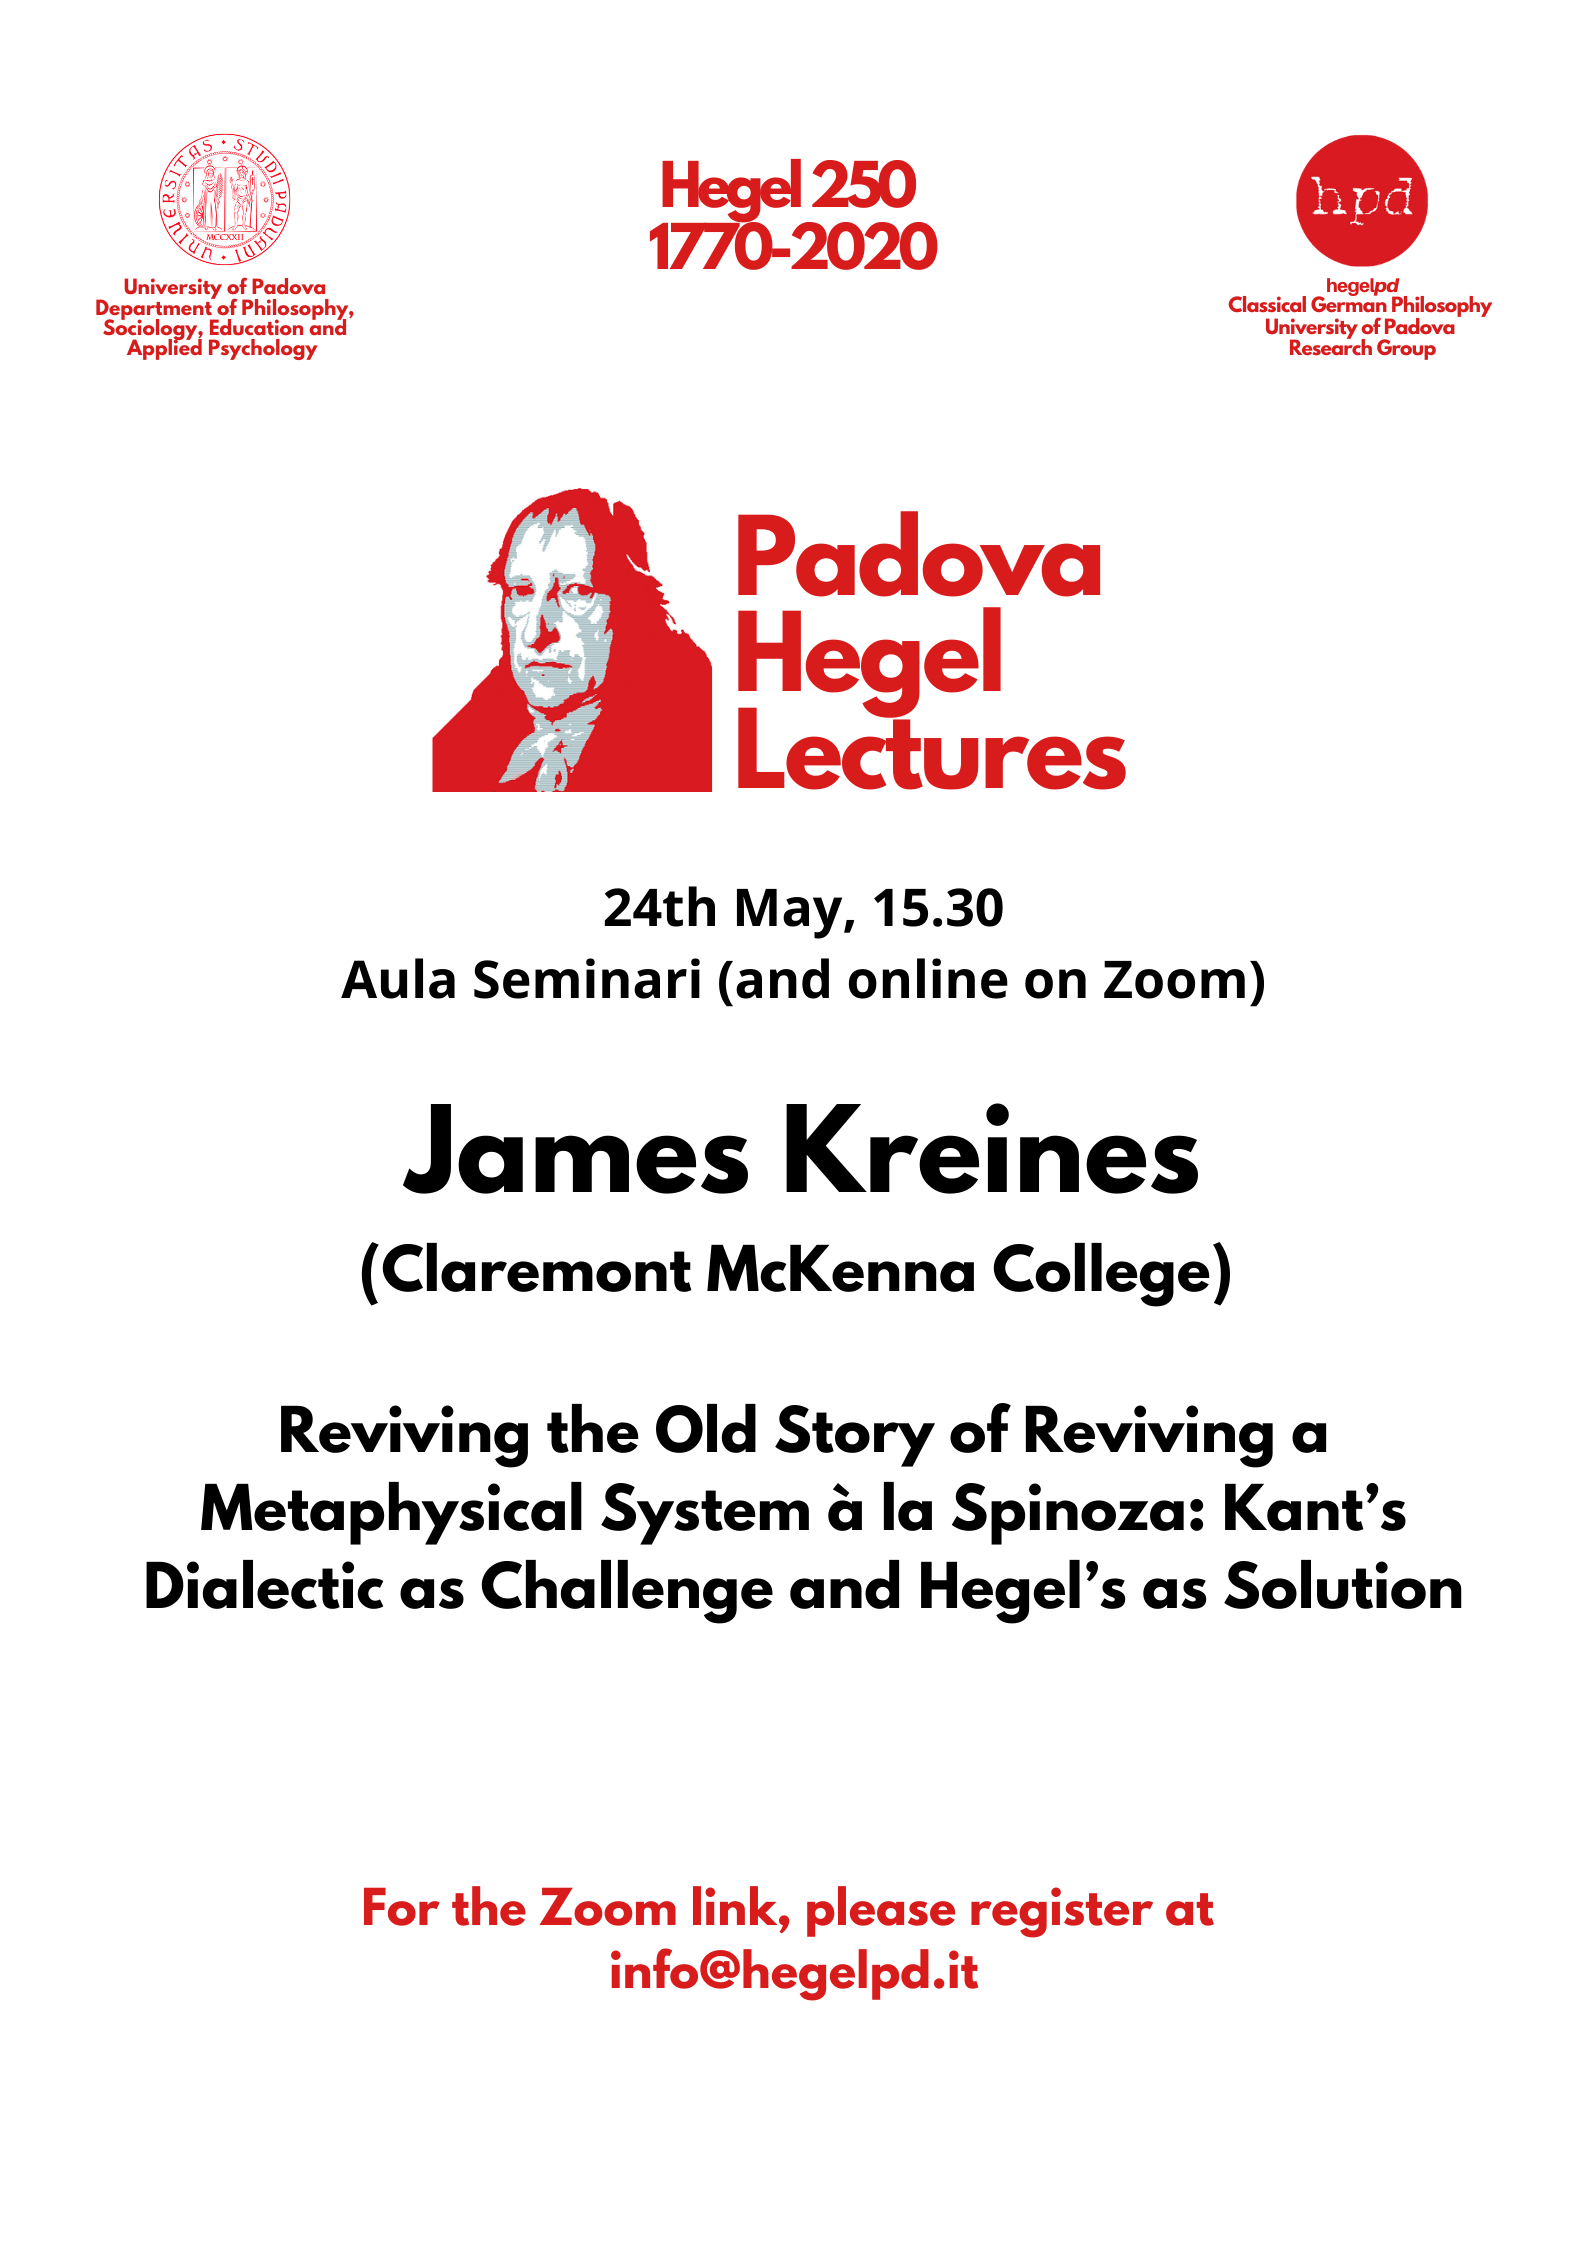 hpd – Padova Hegel Lecture 2020: James Kreines, “Reviving the Old Story of Reviving a Metaphysical System à la Spinoza: Kant’s Dialectic as Challenge and Hegel’s as Solution” (Padova, May 24th, 2022)